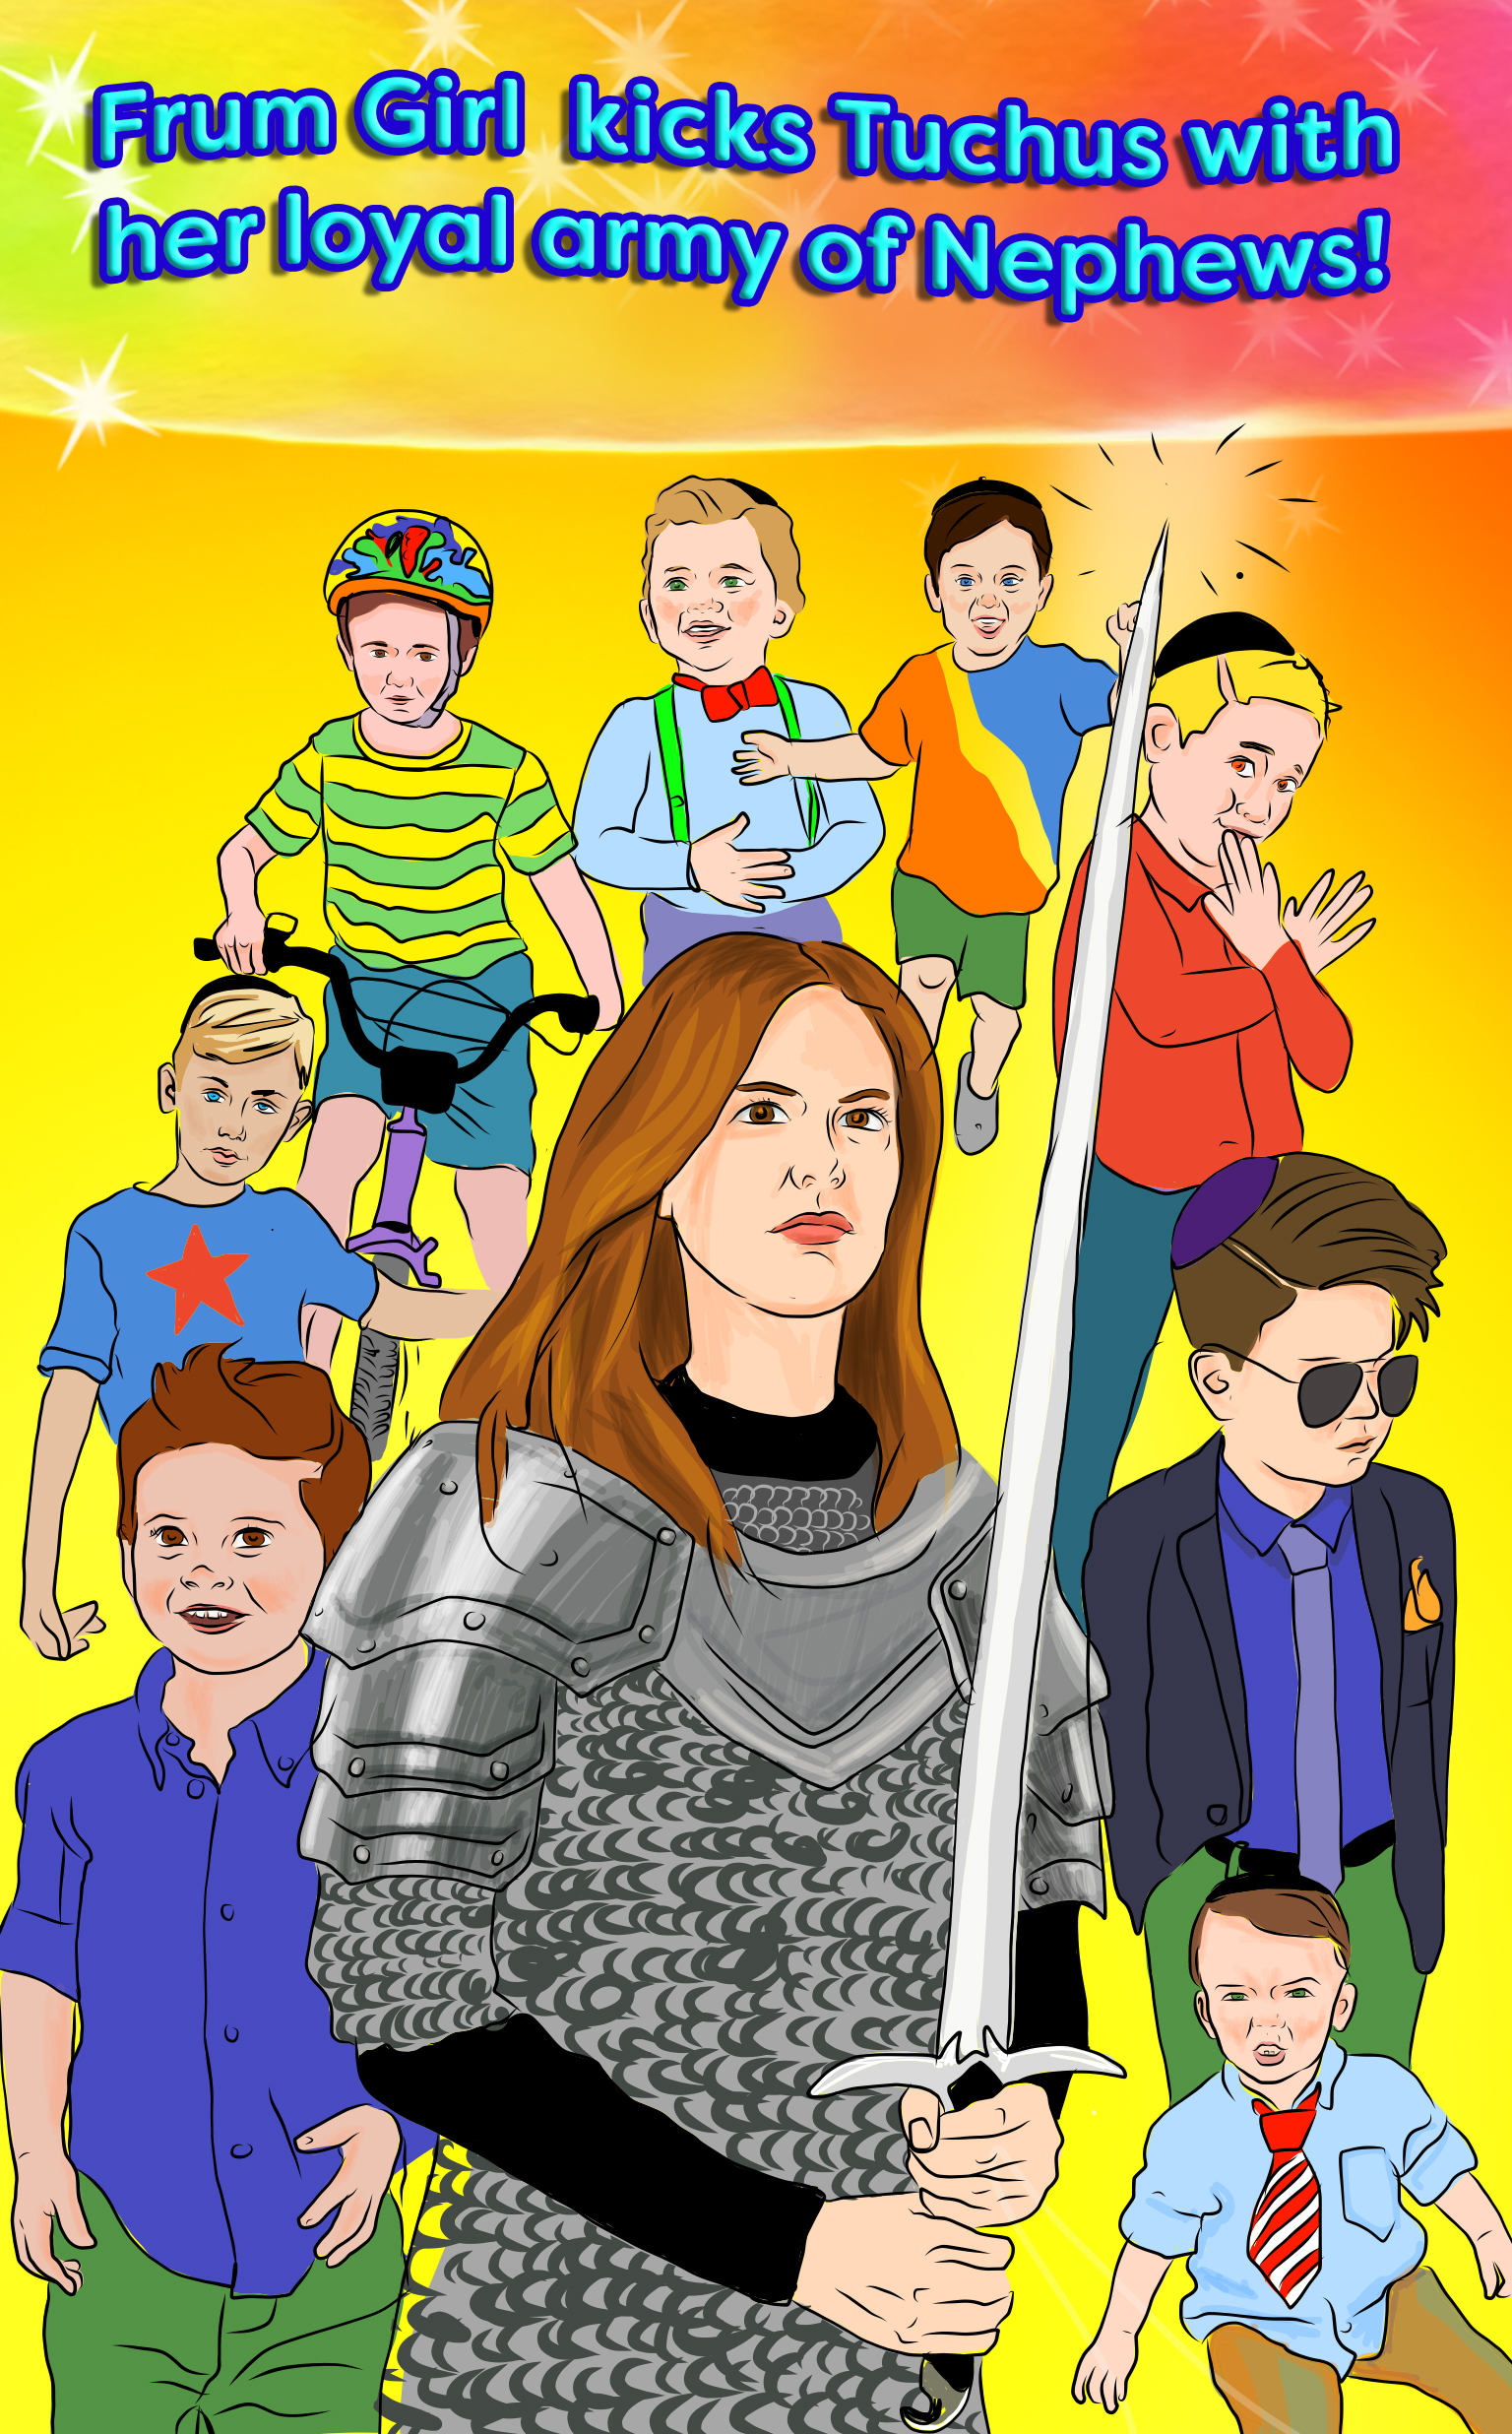 Frum Girl and Her Army of Nephews Poster